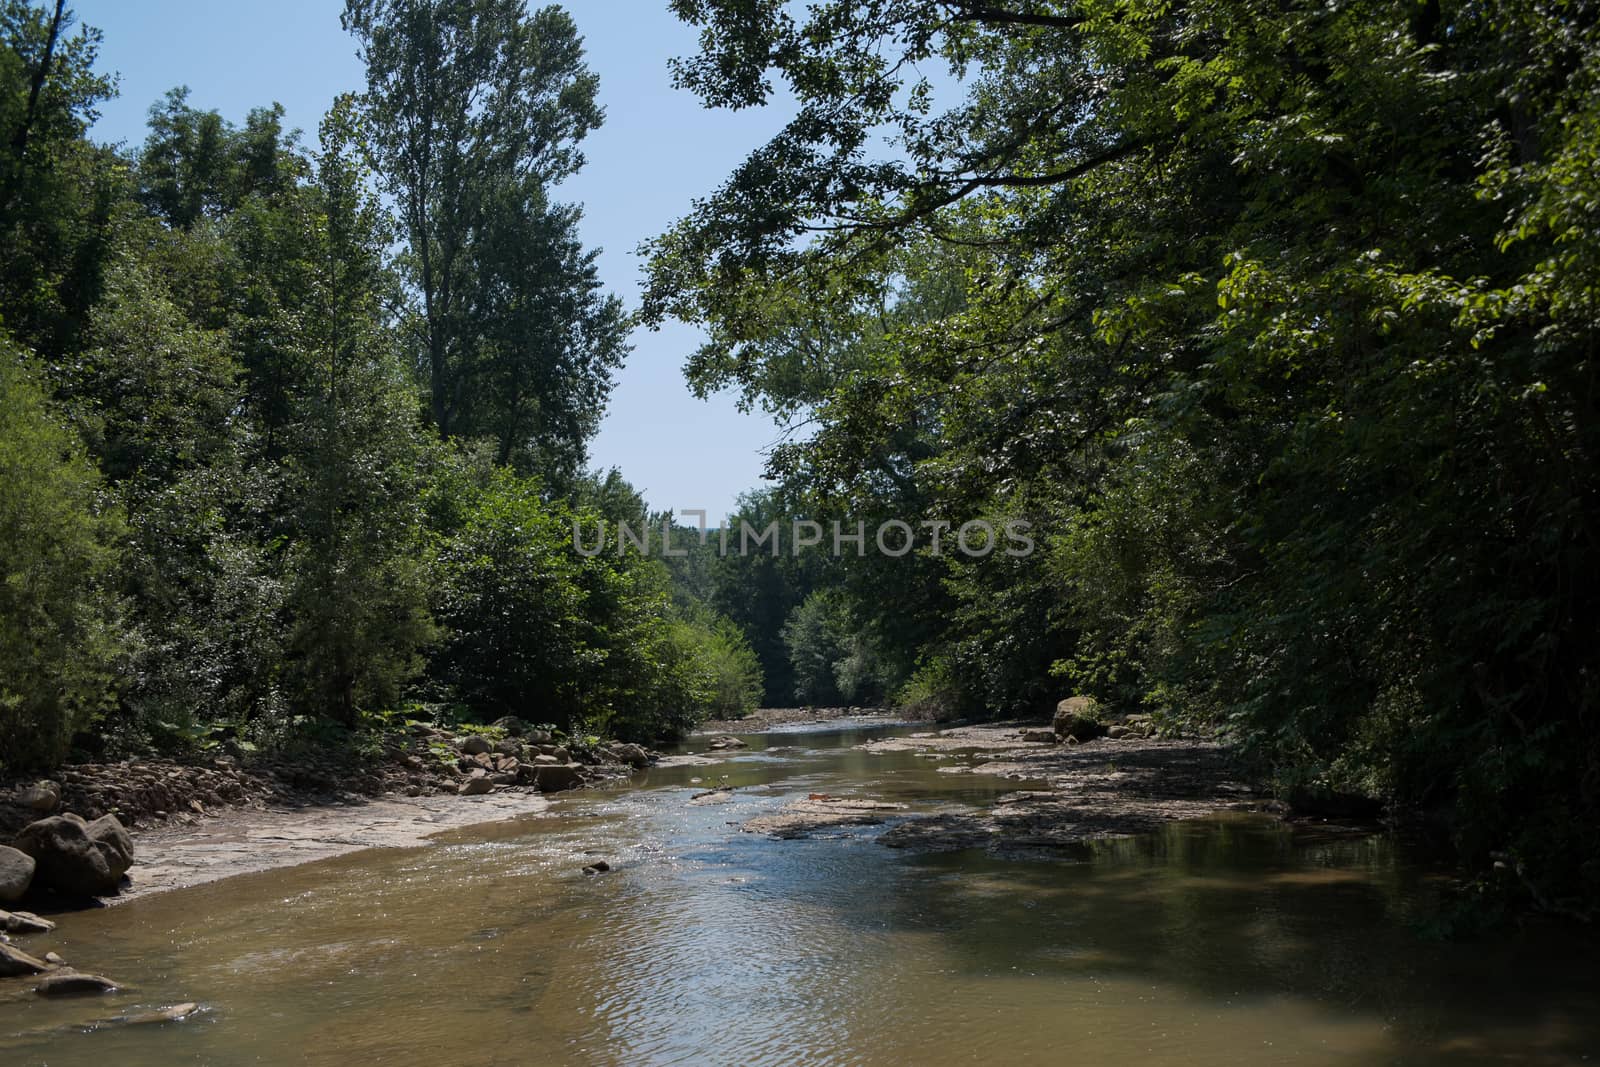 River deep in mountain forest. Nature composition. Mountain river flowing through the green forest

